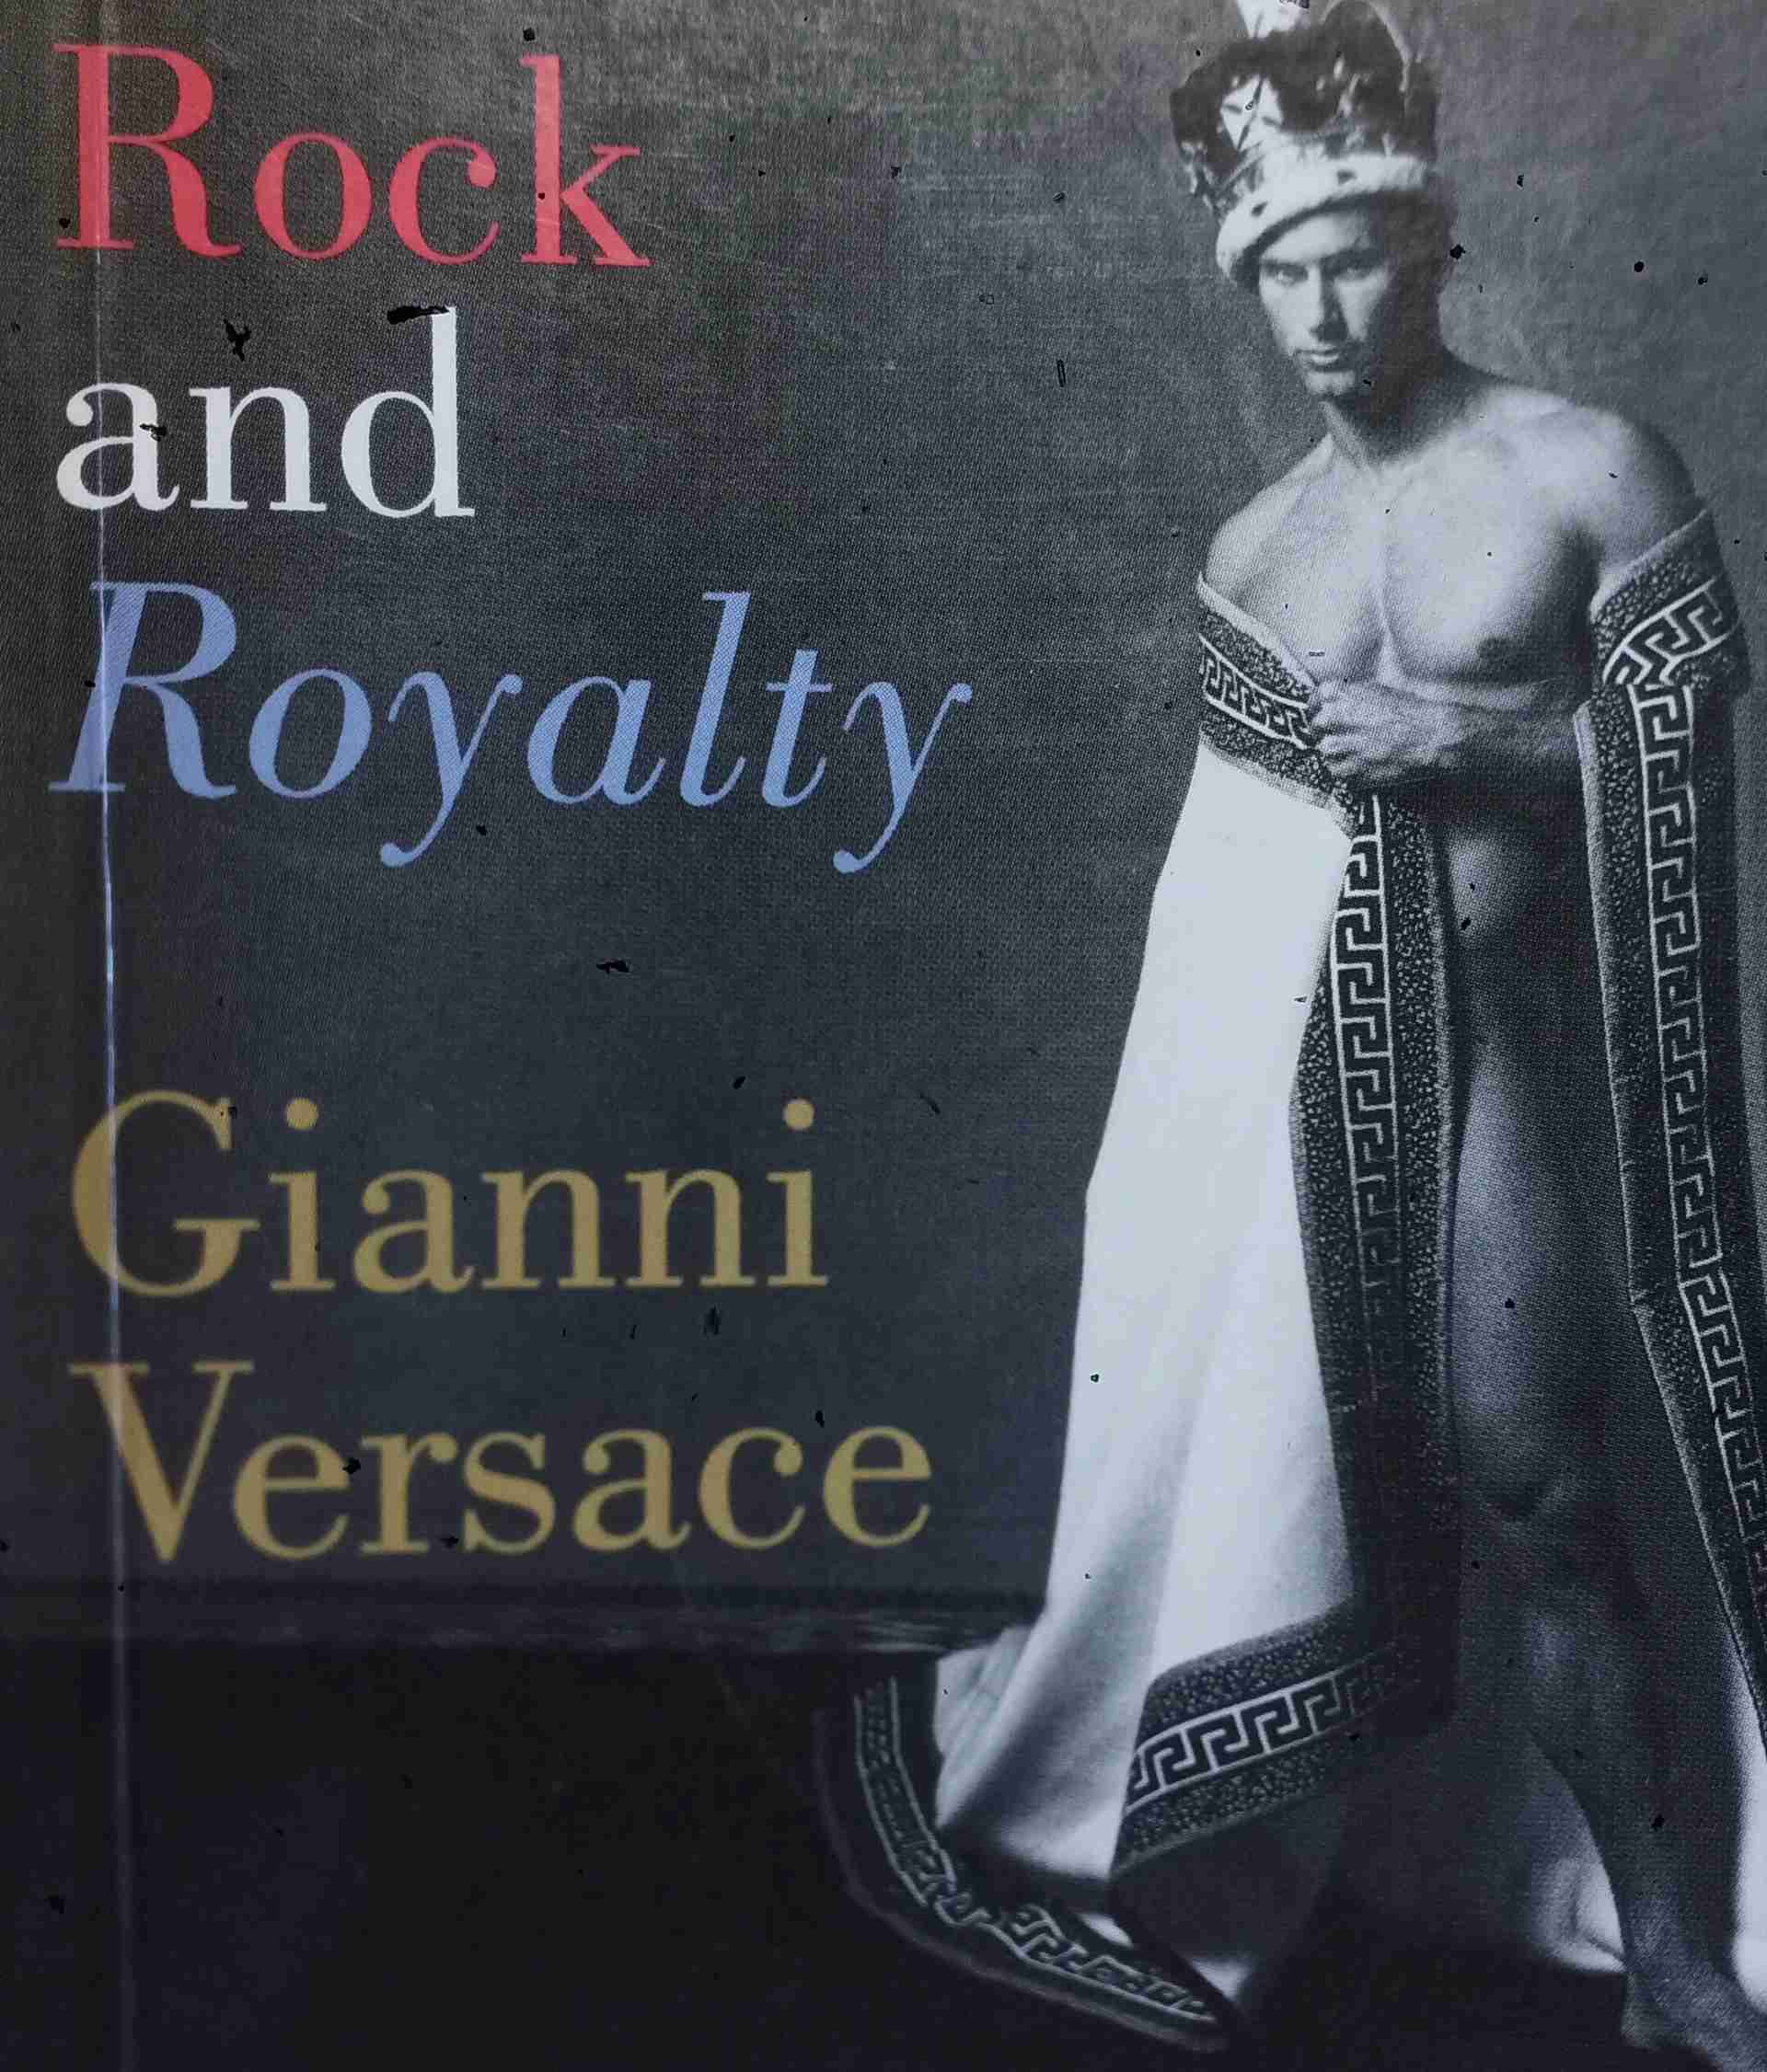 Rock and Royalty - Gianni Versace (English edition)